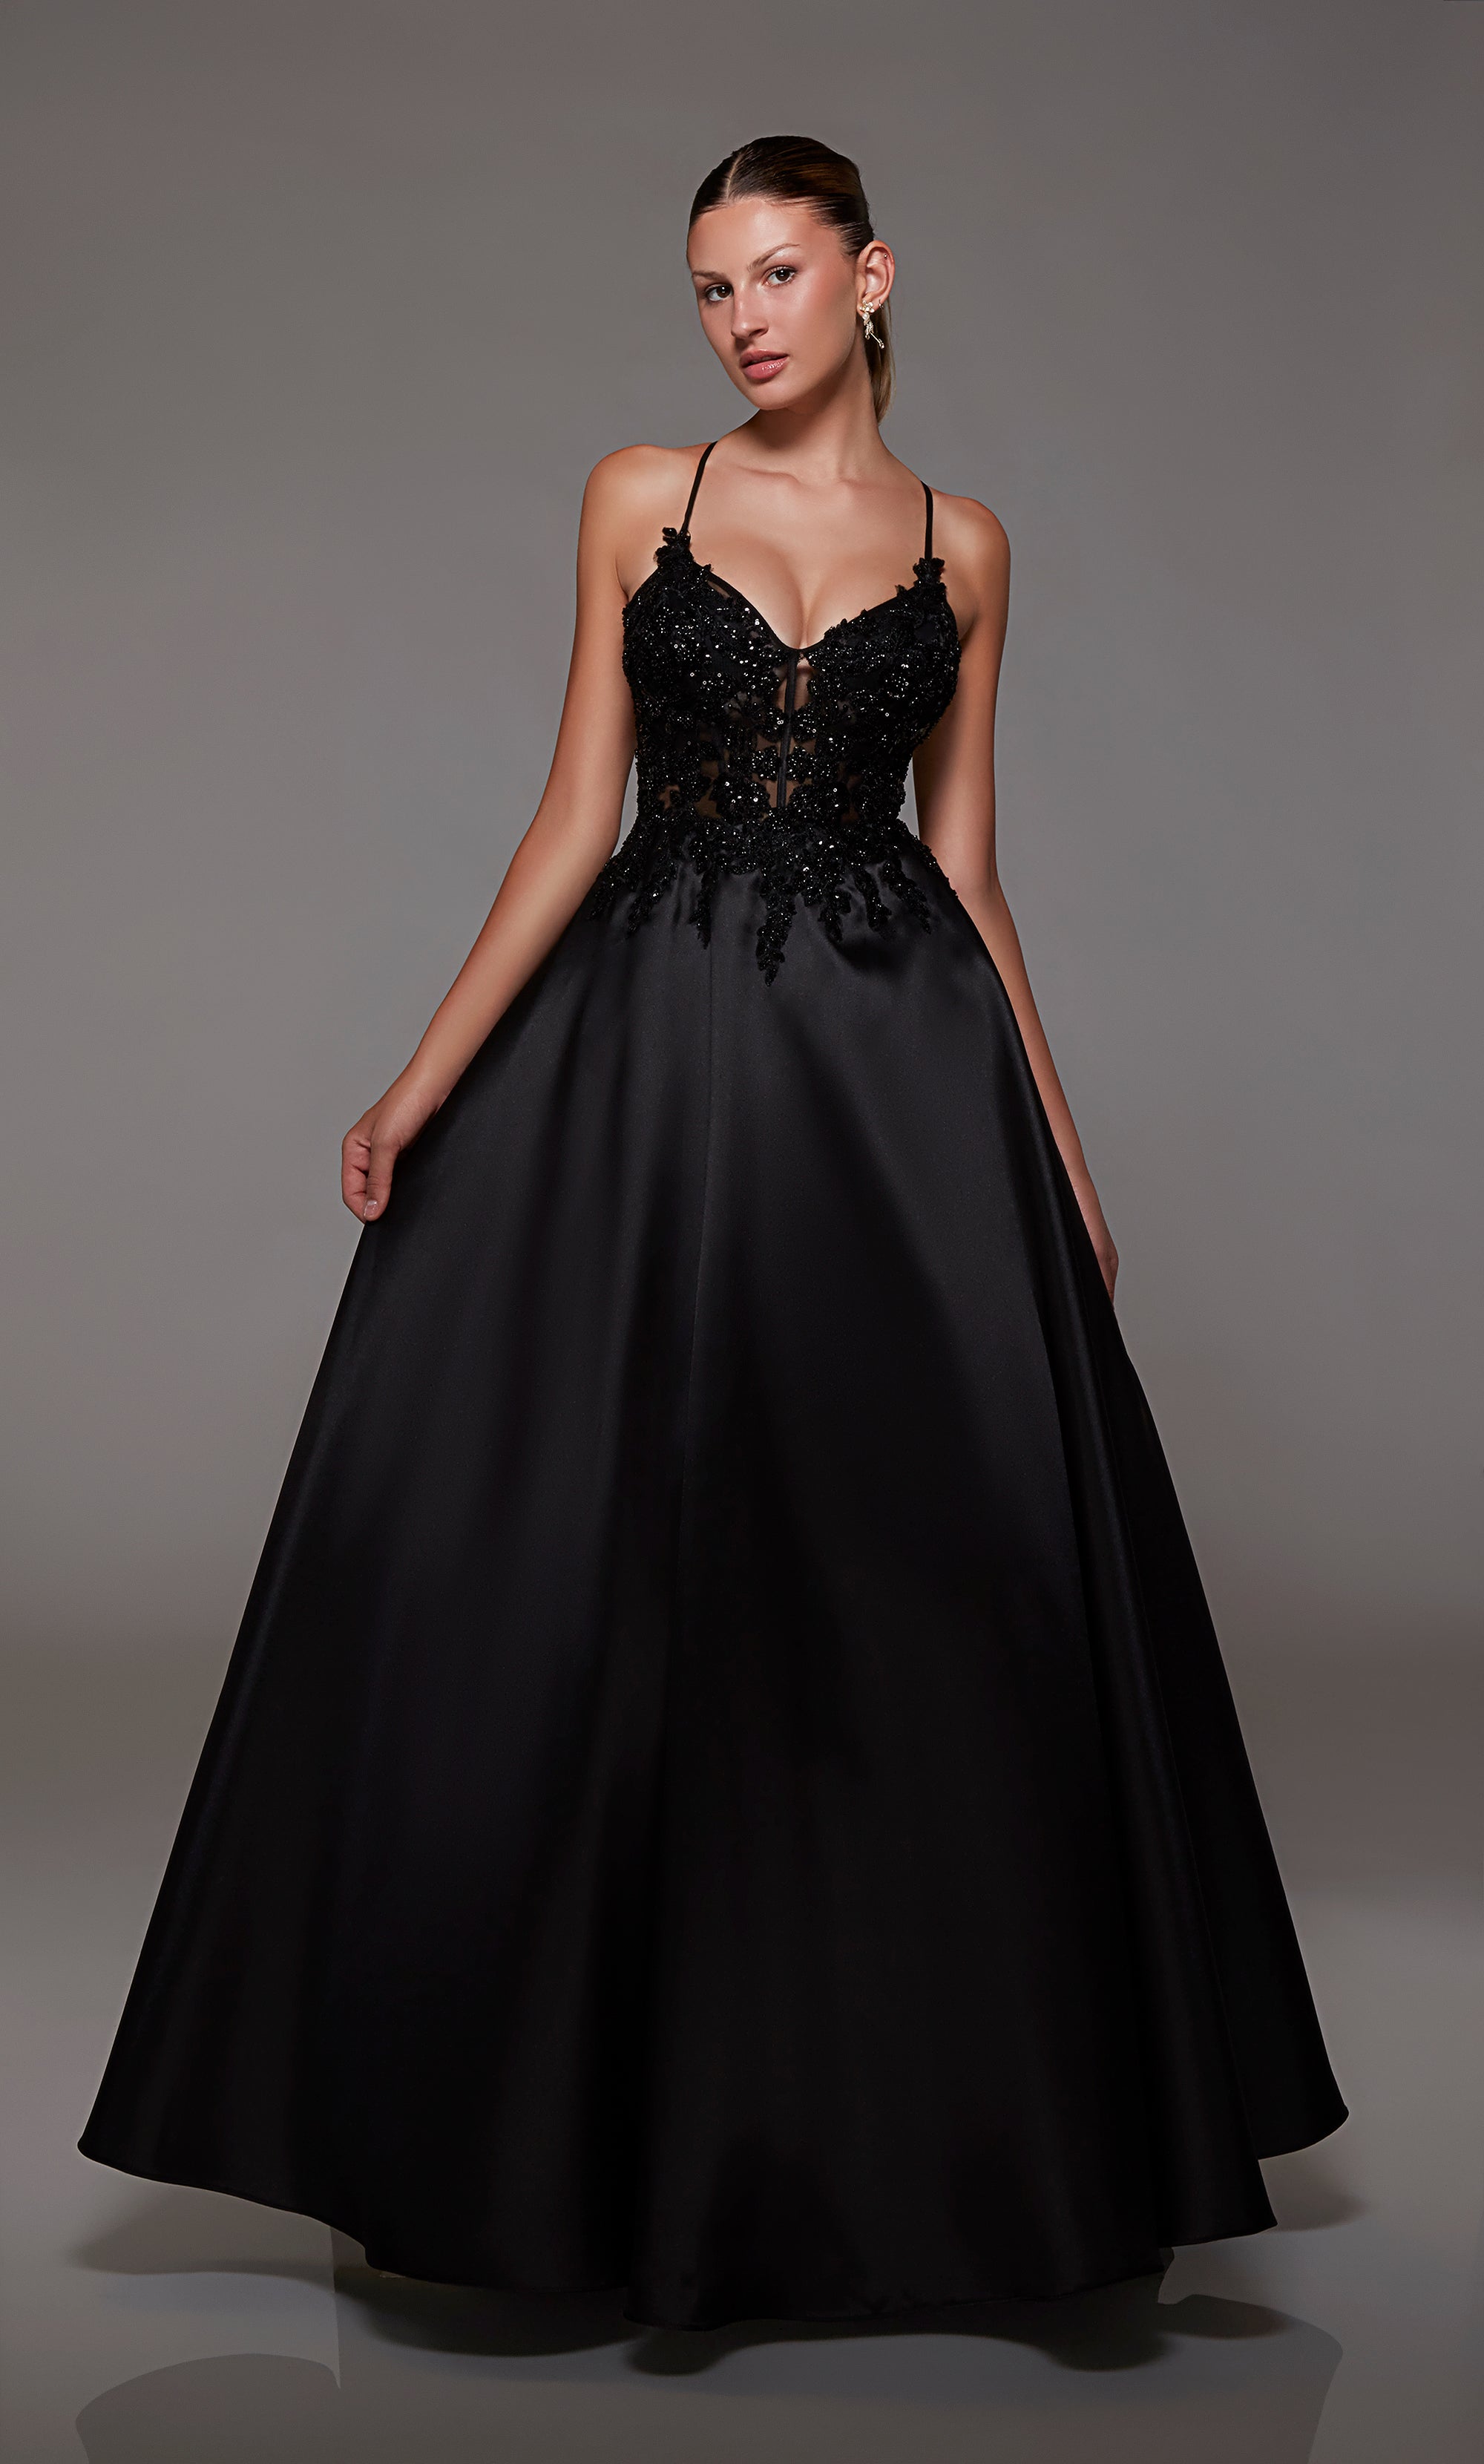 2023 Black Ball Gown Quinceanera Dark Blue Dresses With Spaghetti Straps,  Appliques, Satin Fabric, And Backless Design Perfect For Prom, Sweet 16, Or  Saudi Arabic Fashion From Verycute, $61.47 | DHgate.Com